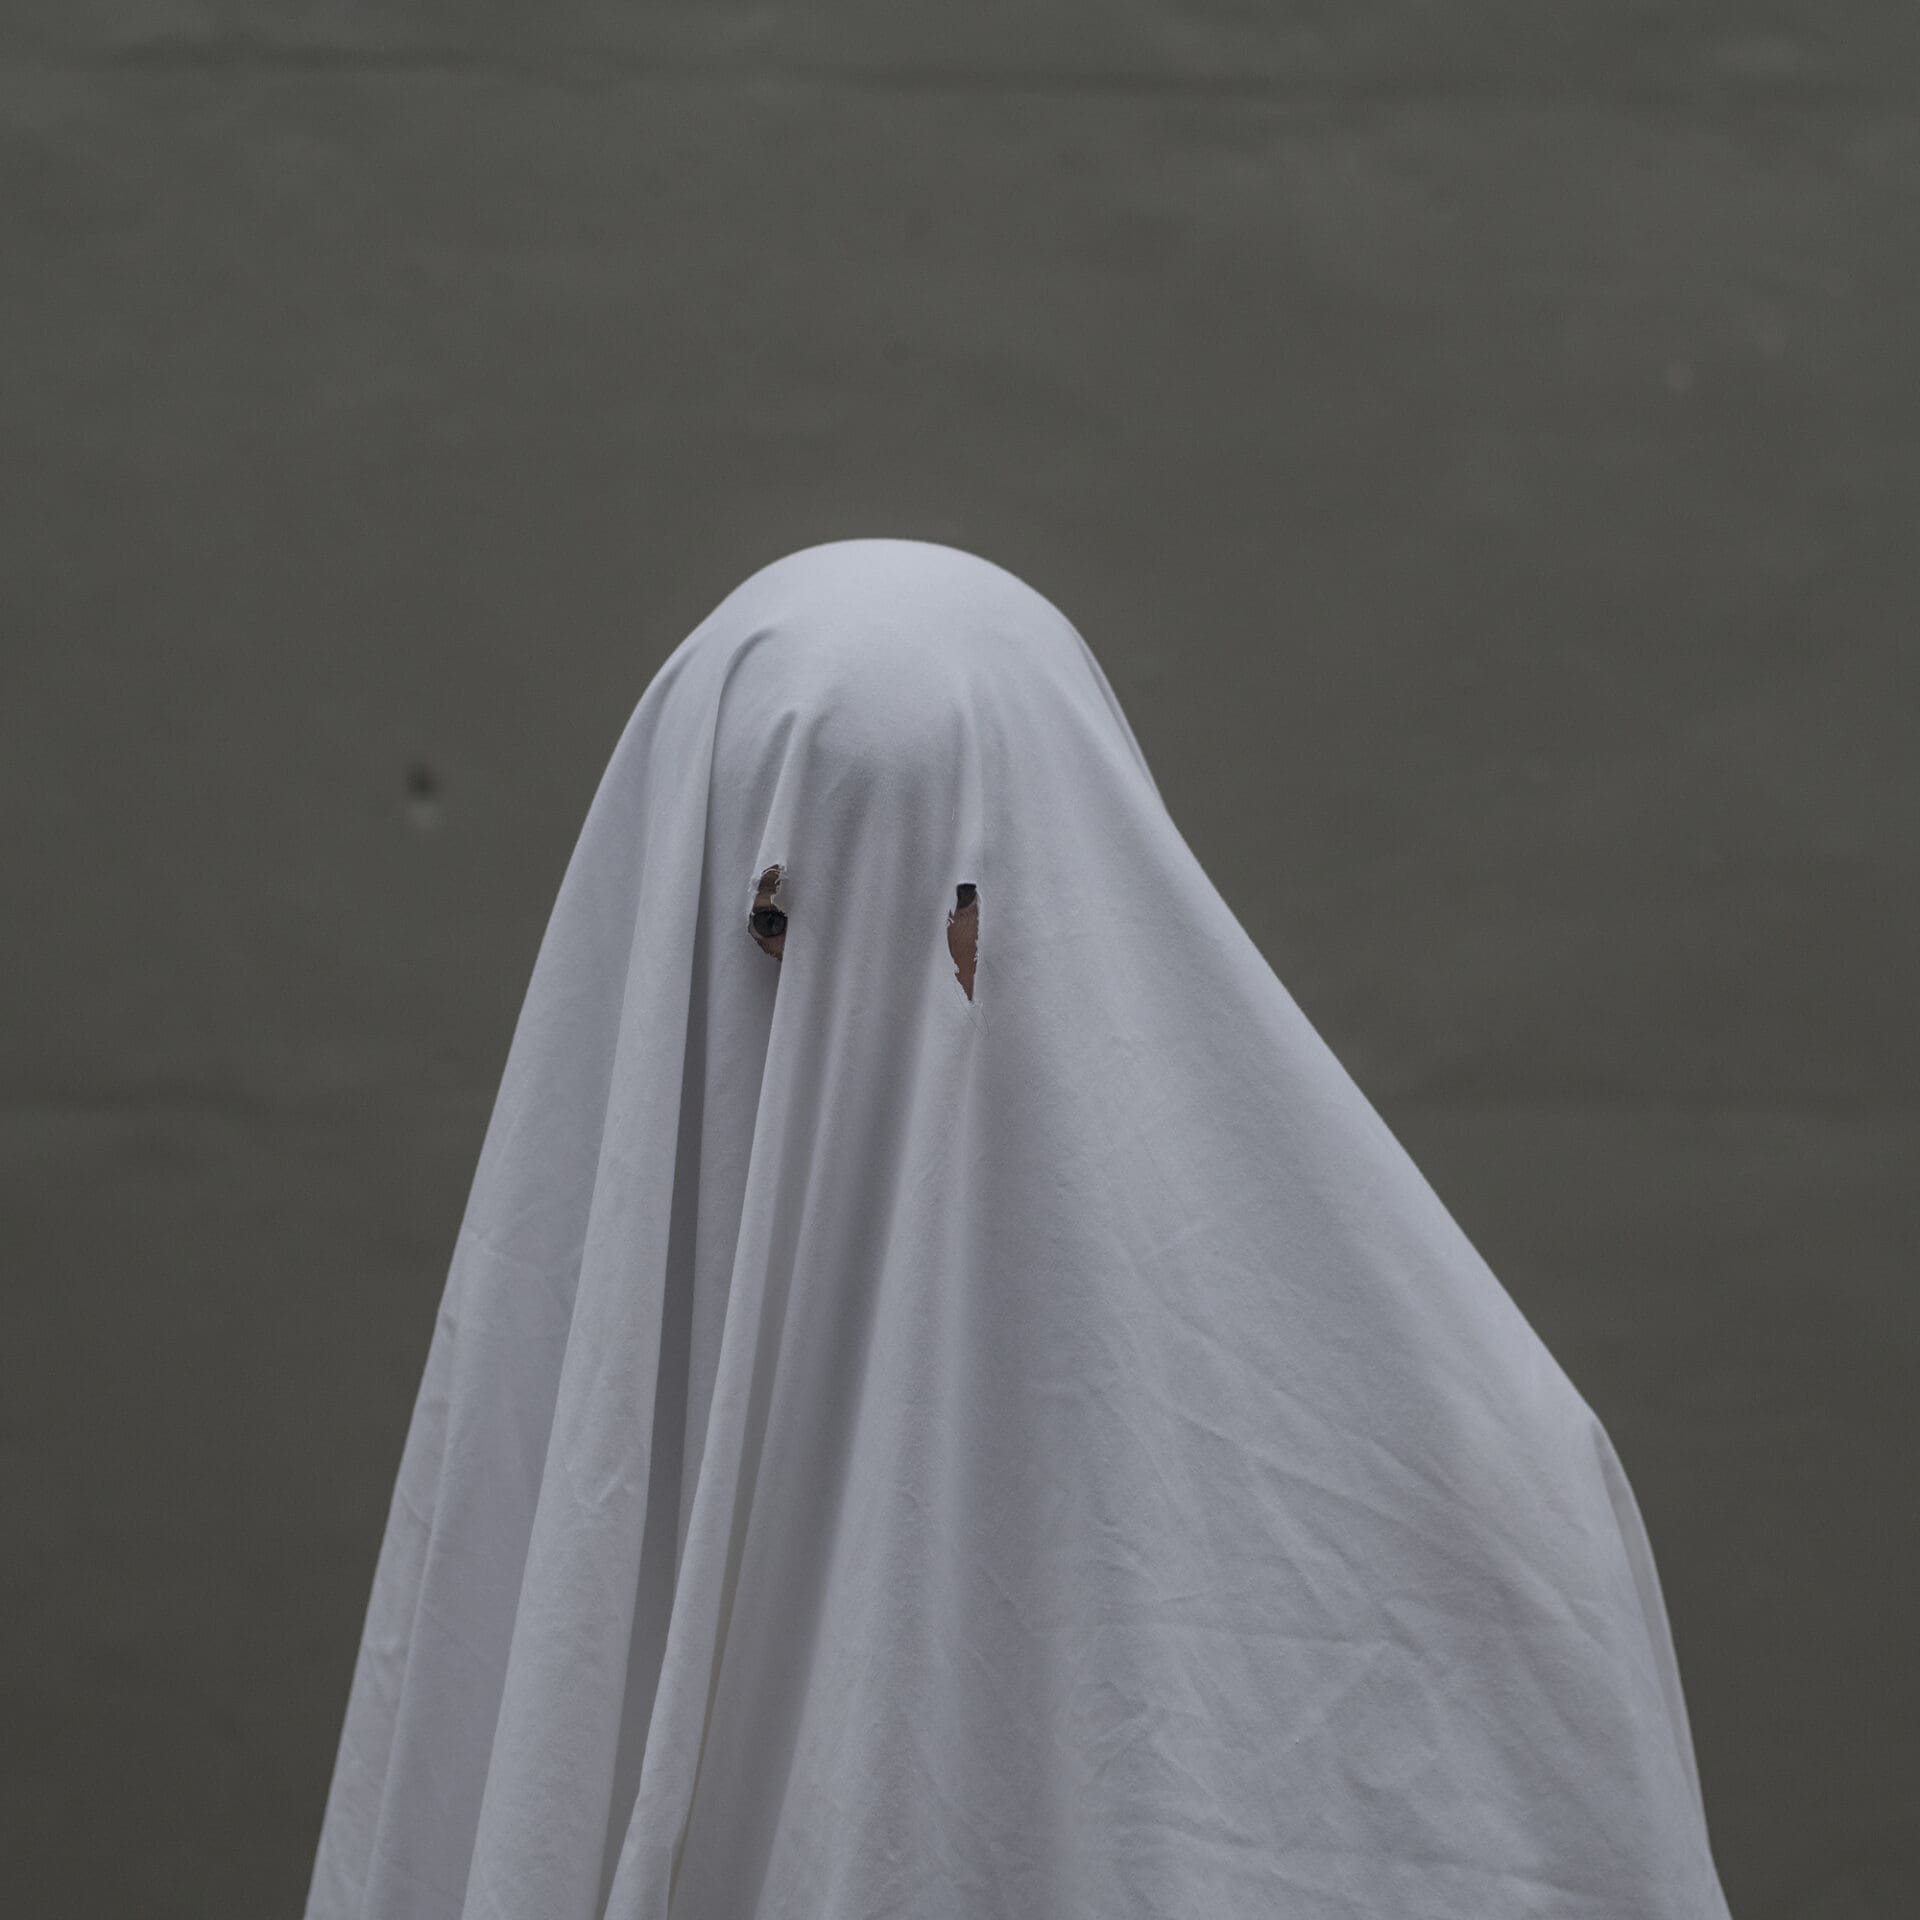 Photographer Rich-Joseph Facun | Someone wears a white bedsheet with two holes for eyes, like a ghost